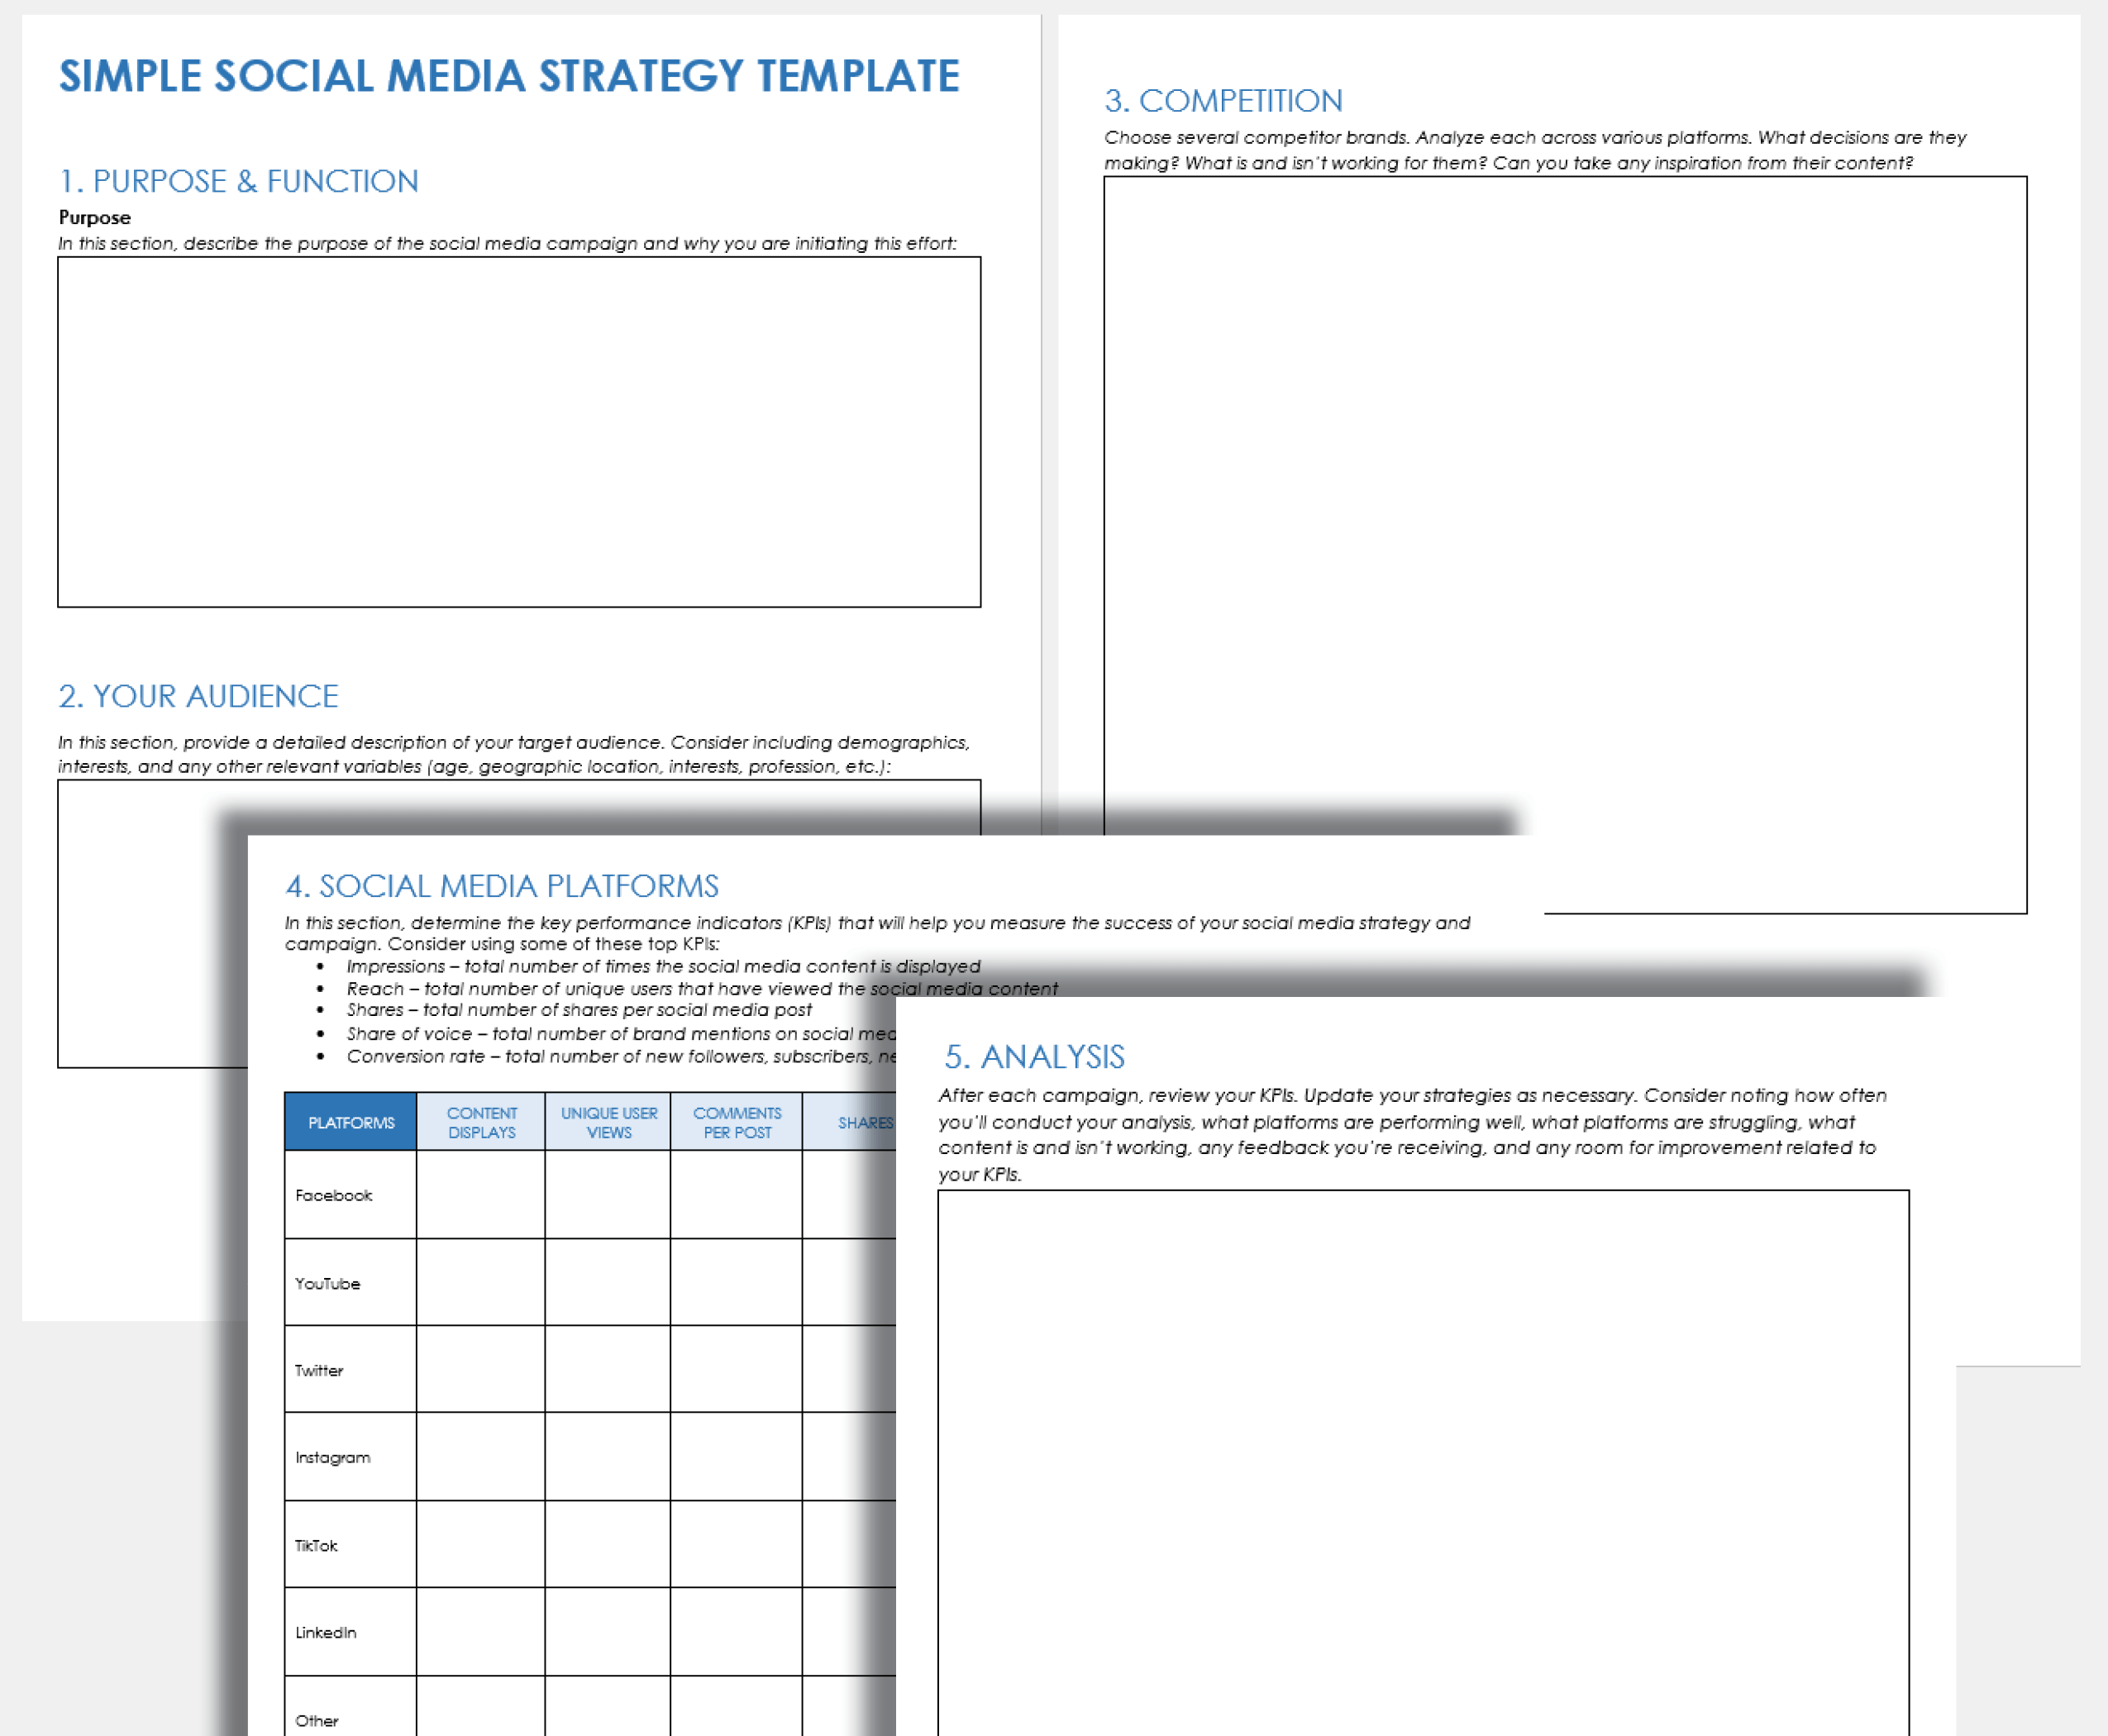 Simple Social Media Strategy Template